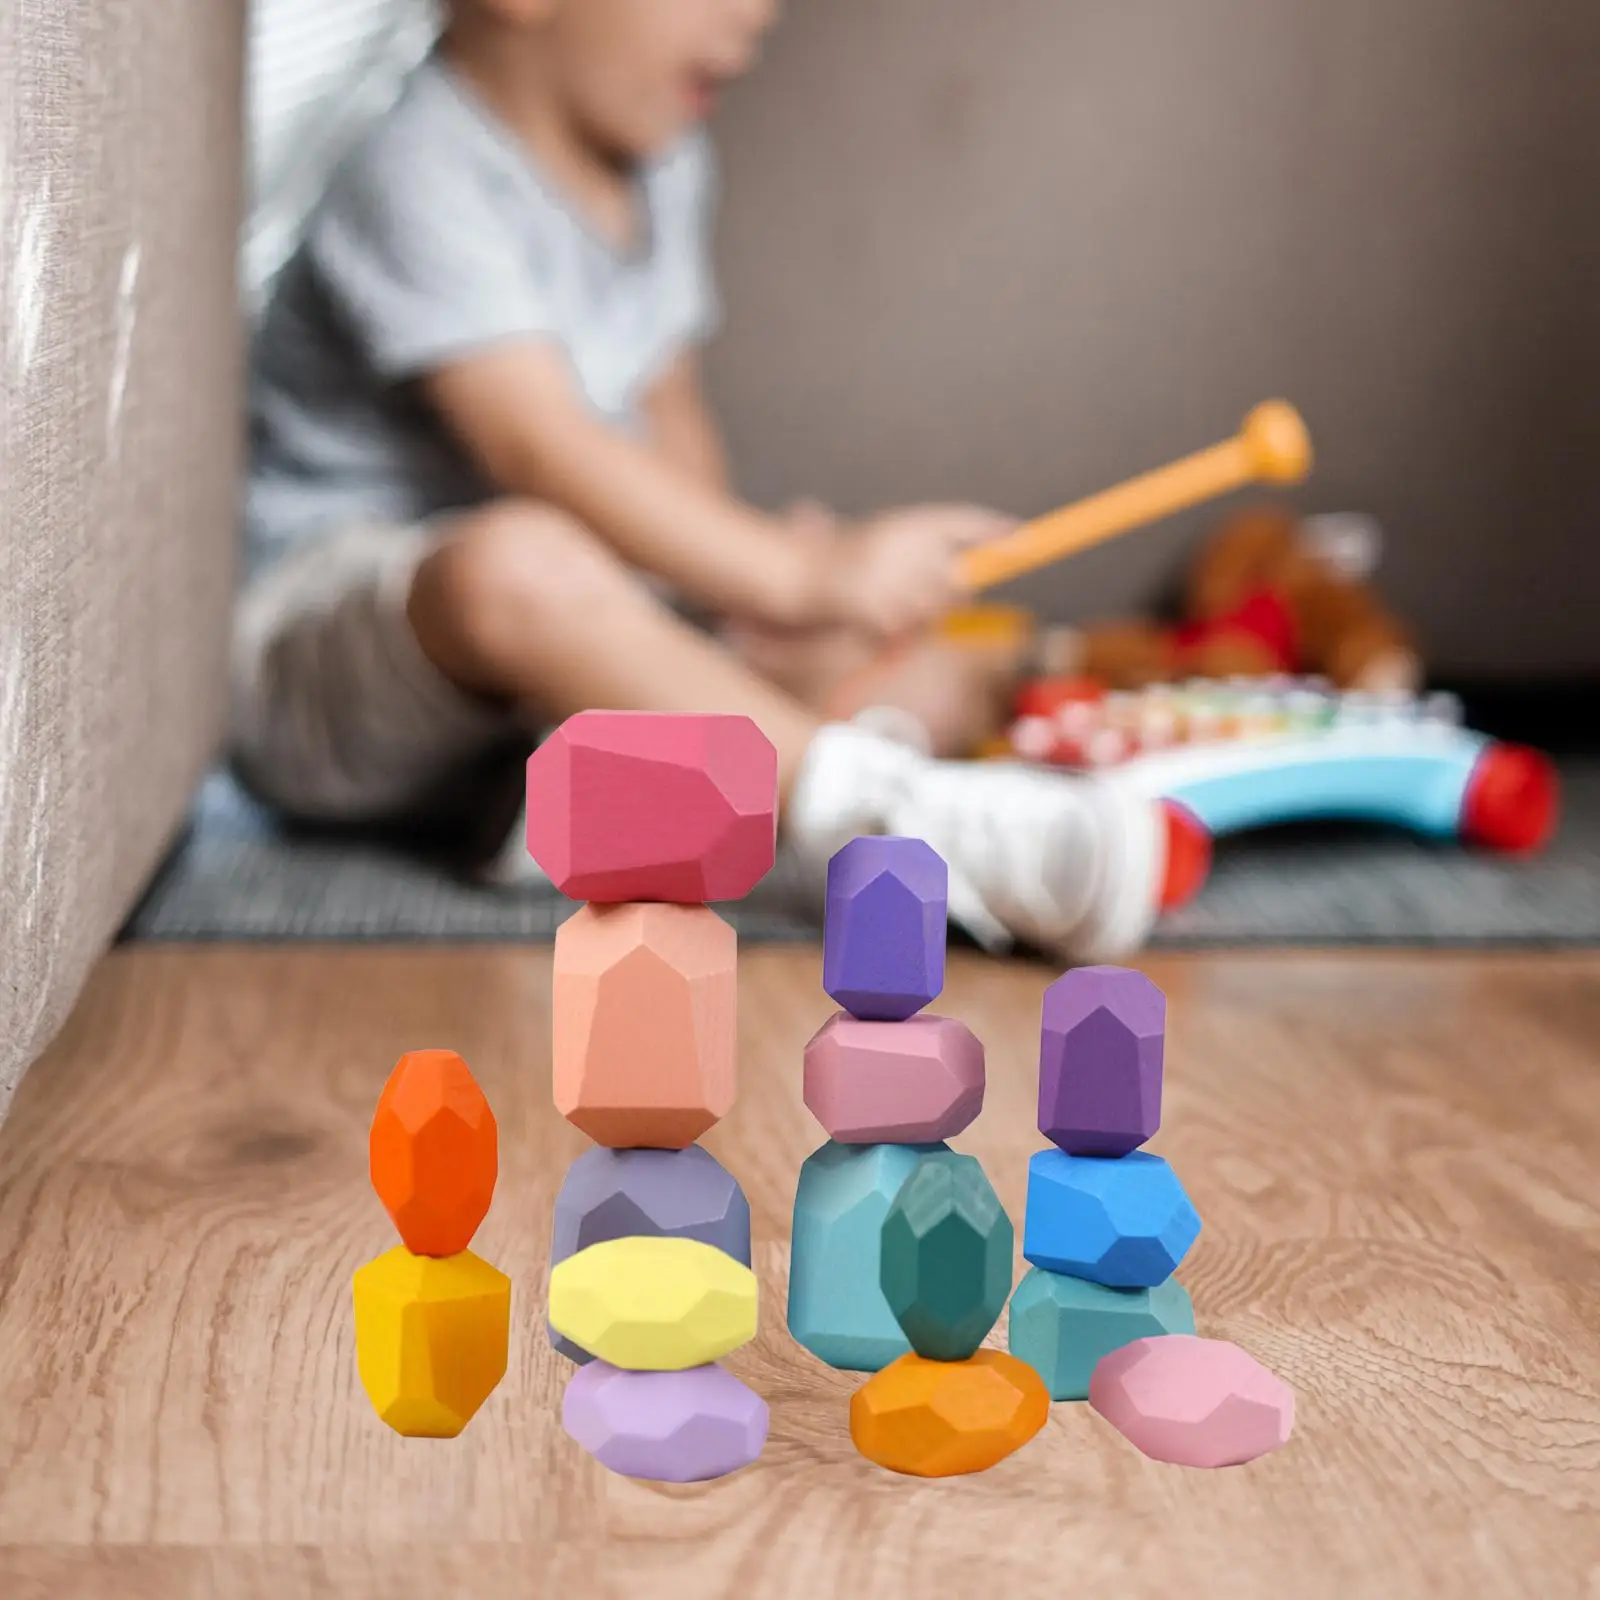 Wooden Balancing Stacking Stones Montessori Puzzle Toys Preschool Learning Artware Building Blocks Stacking Game for Kids